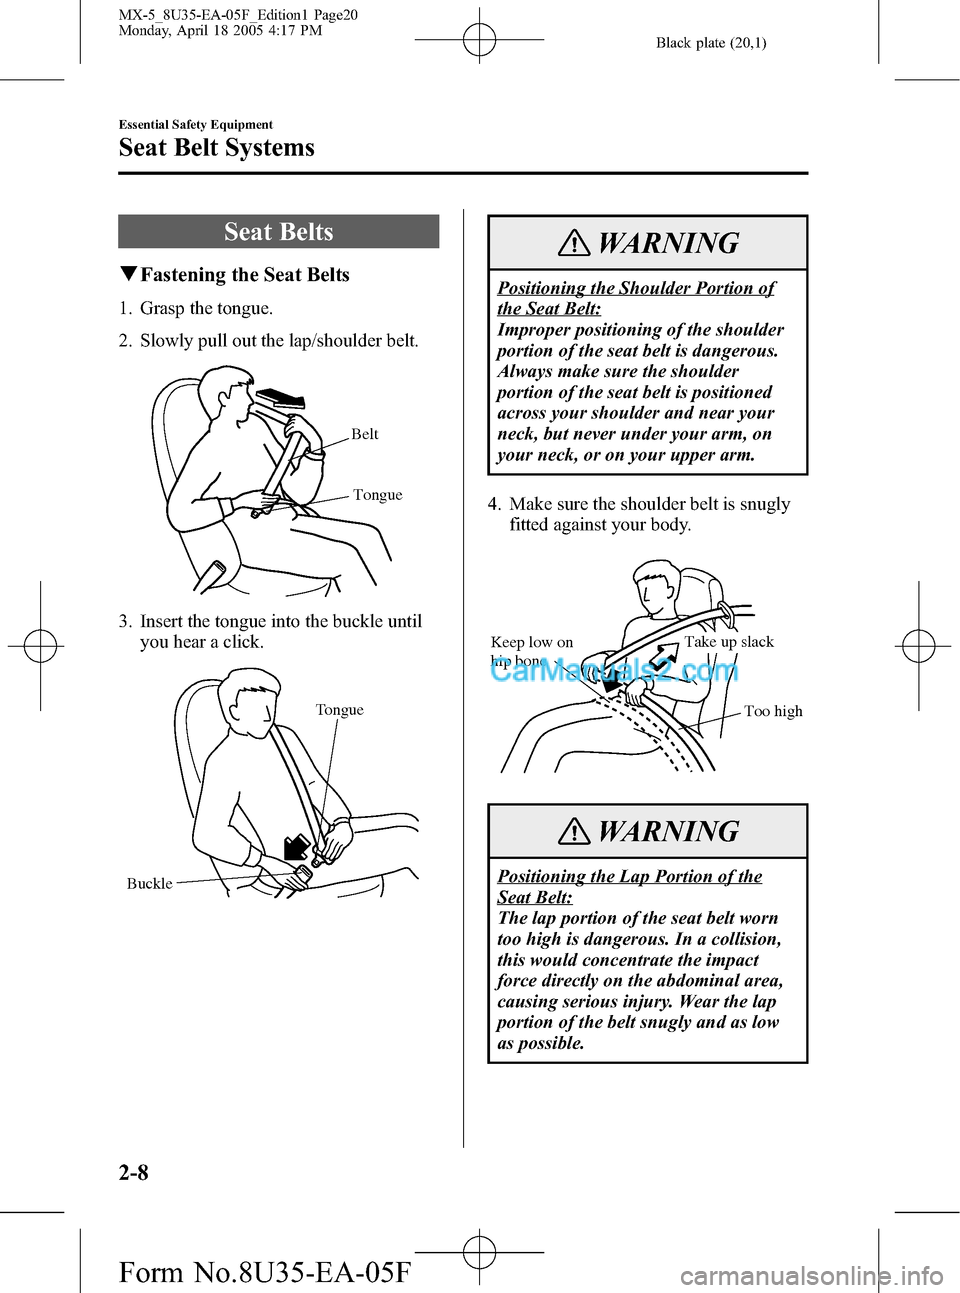 MAZDA MODEL MX-5 2006  Owners Manual (in English) Black plate (20,1)
Seat Belts
qFastening the Seat Belts
1. Grasp the tongue.
2. Slowly pull out the lap/shoulder belt.
Belt
Tongue
3. Insert the tongue into the buckle until
you hear a click.
Tongue
B